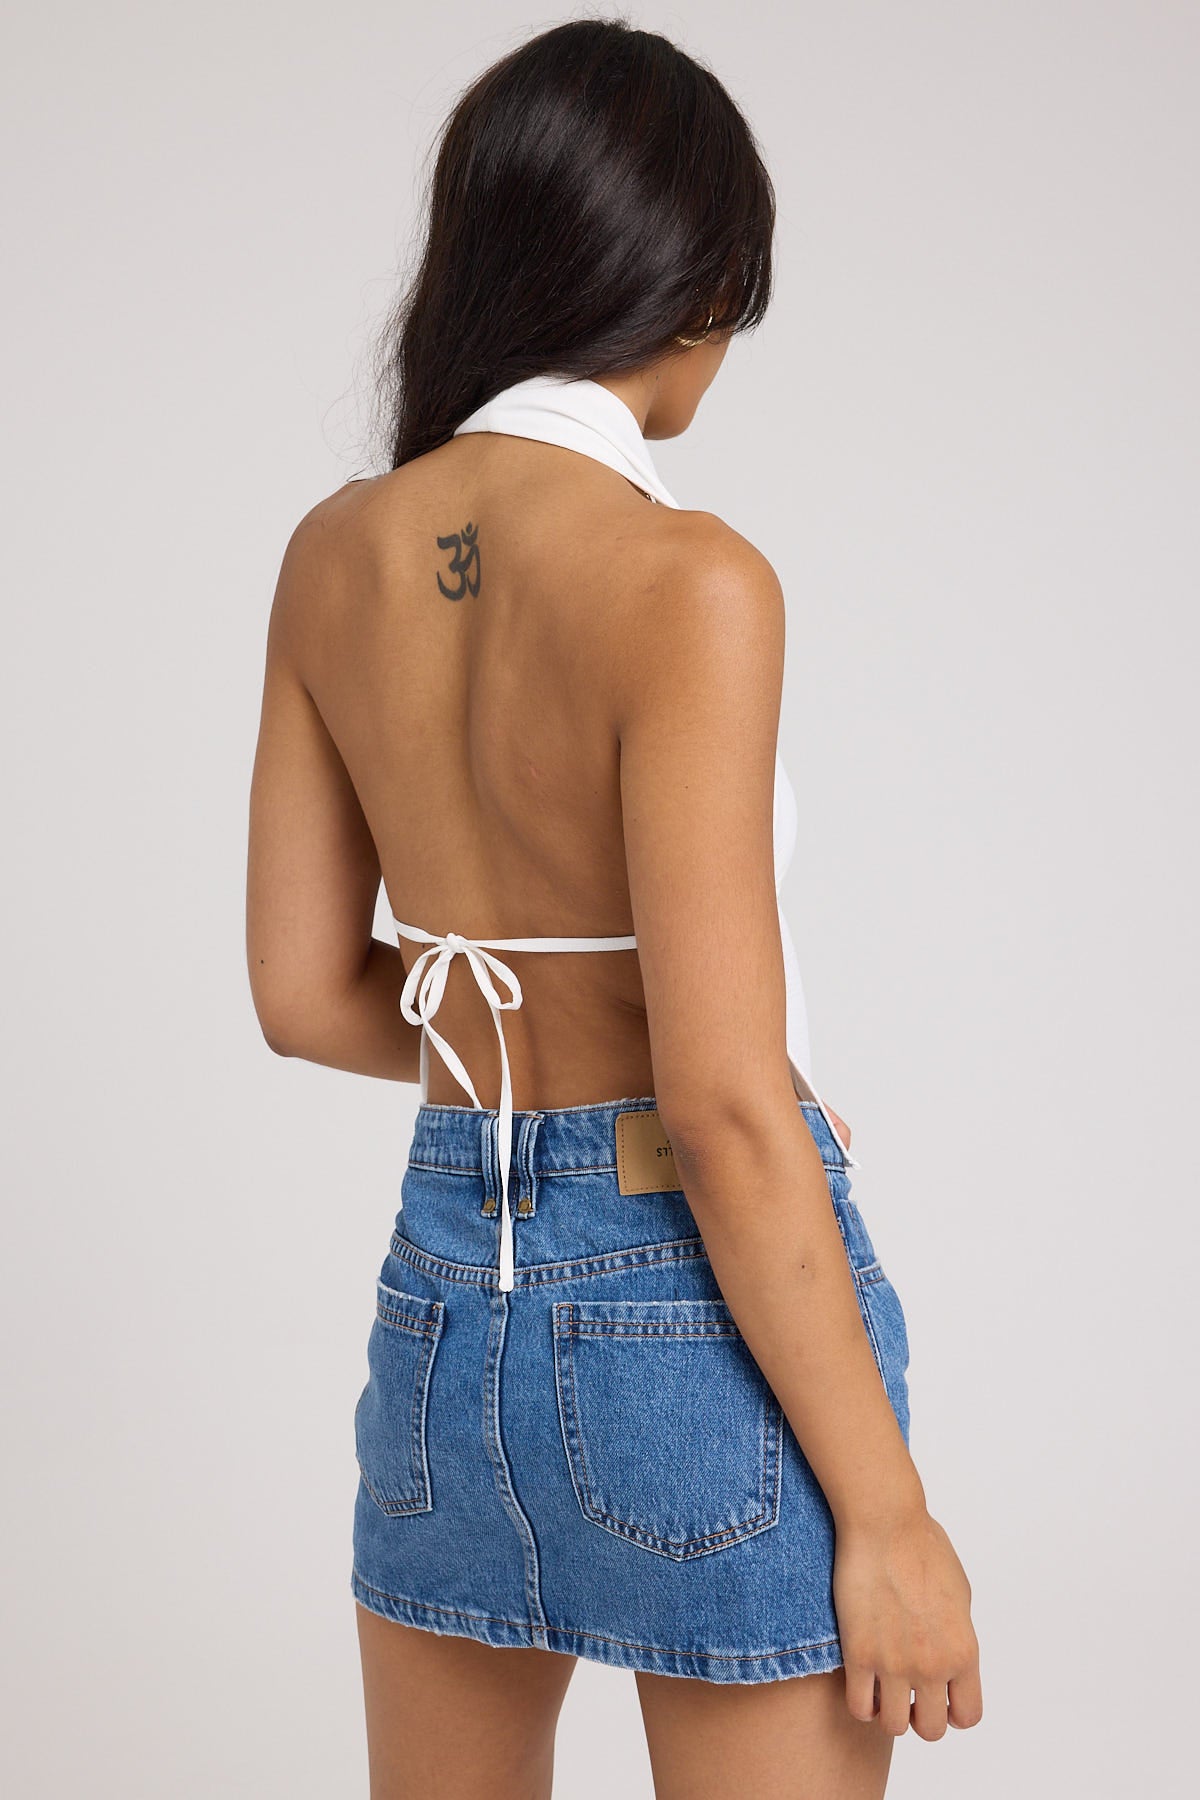 Luck & Trouble Gwen Halter Backless Top White